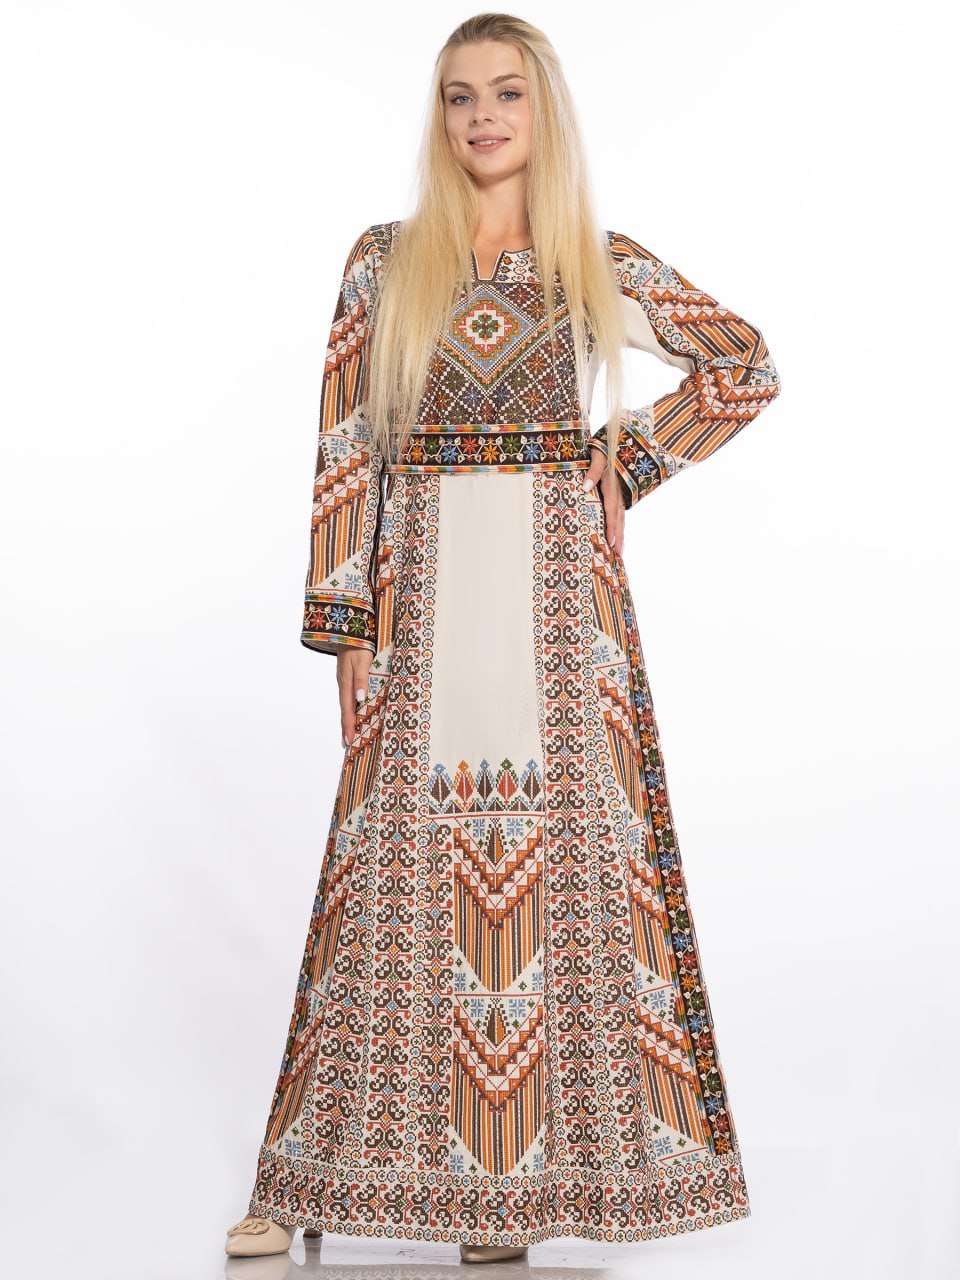 Jenin Elegance - High Quality Traditional Embroidered Palestinian Thobe